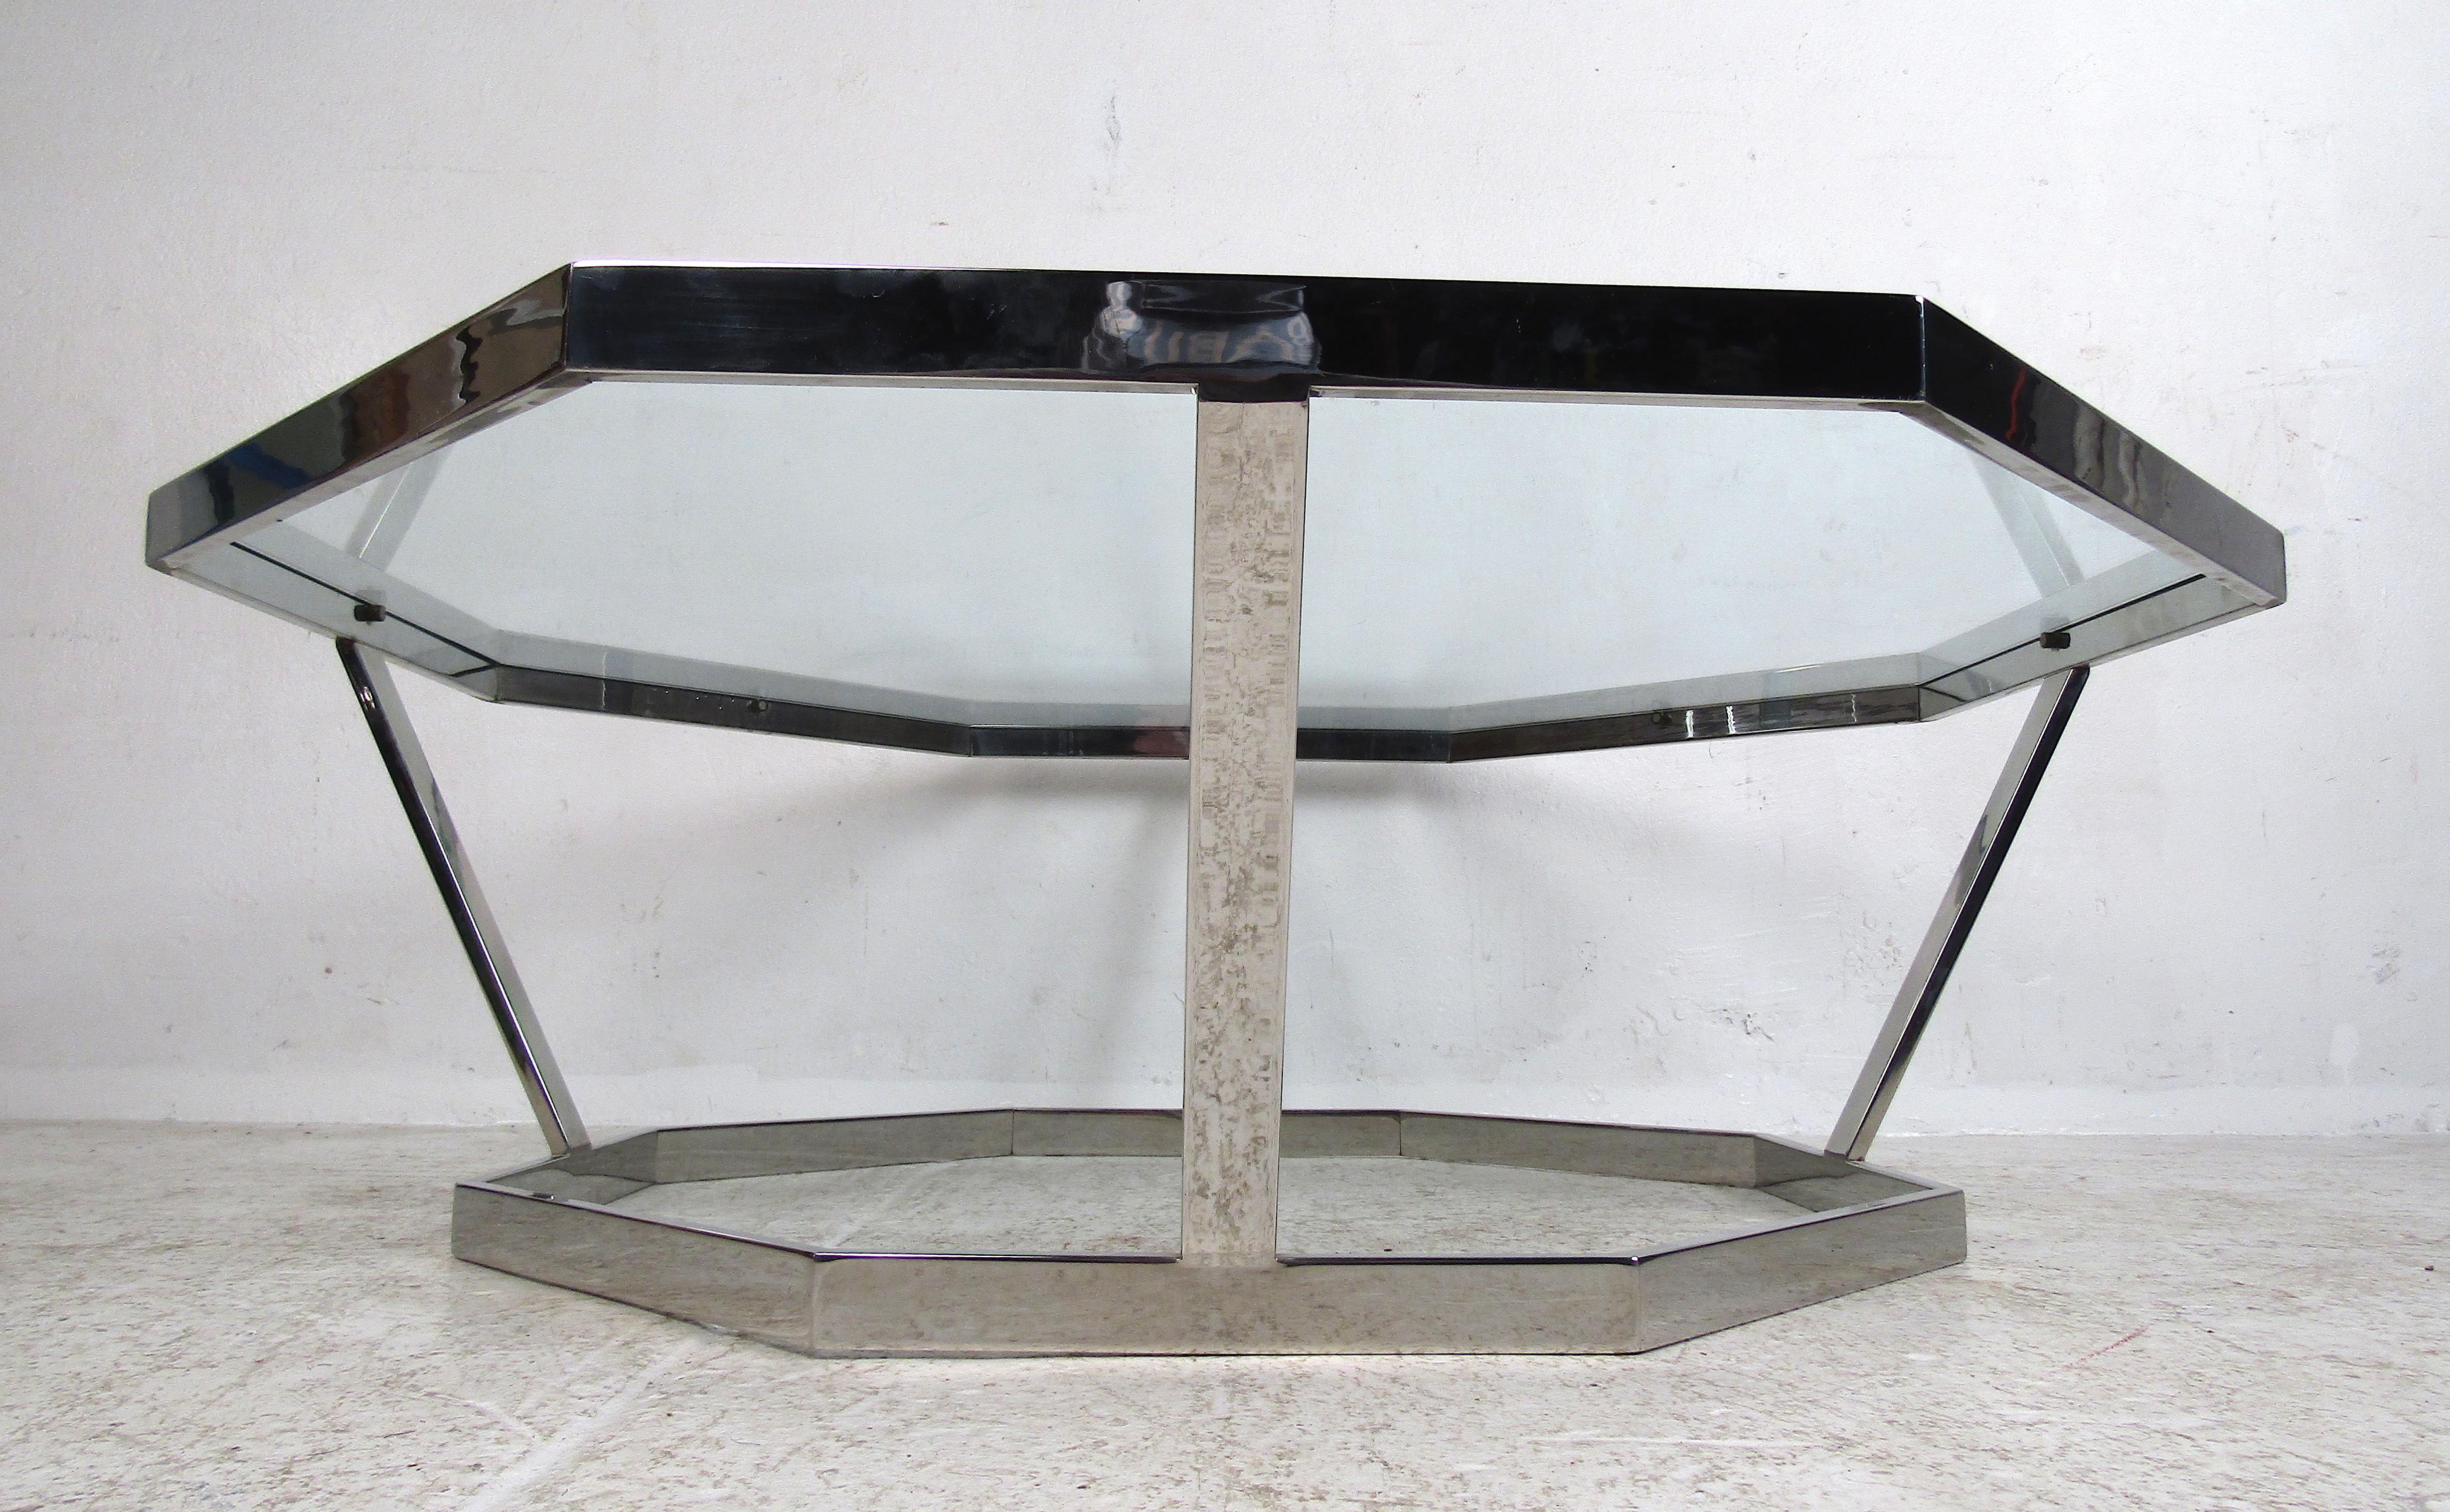 Unusual Mid-Century Modern octagonal coffee table with a chrome frame and glass tabletop. Interesting piece that is sure to compliment any modern interior. Please confirm item location with dealer (NJ or NY).